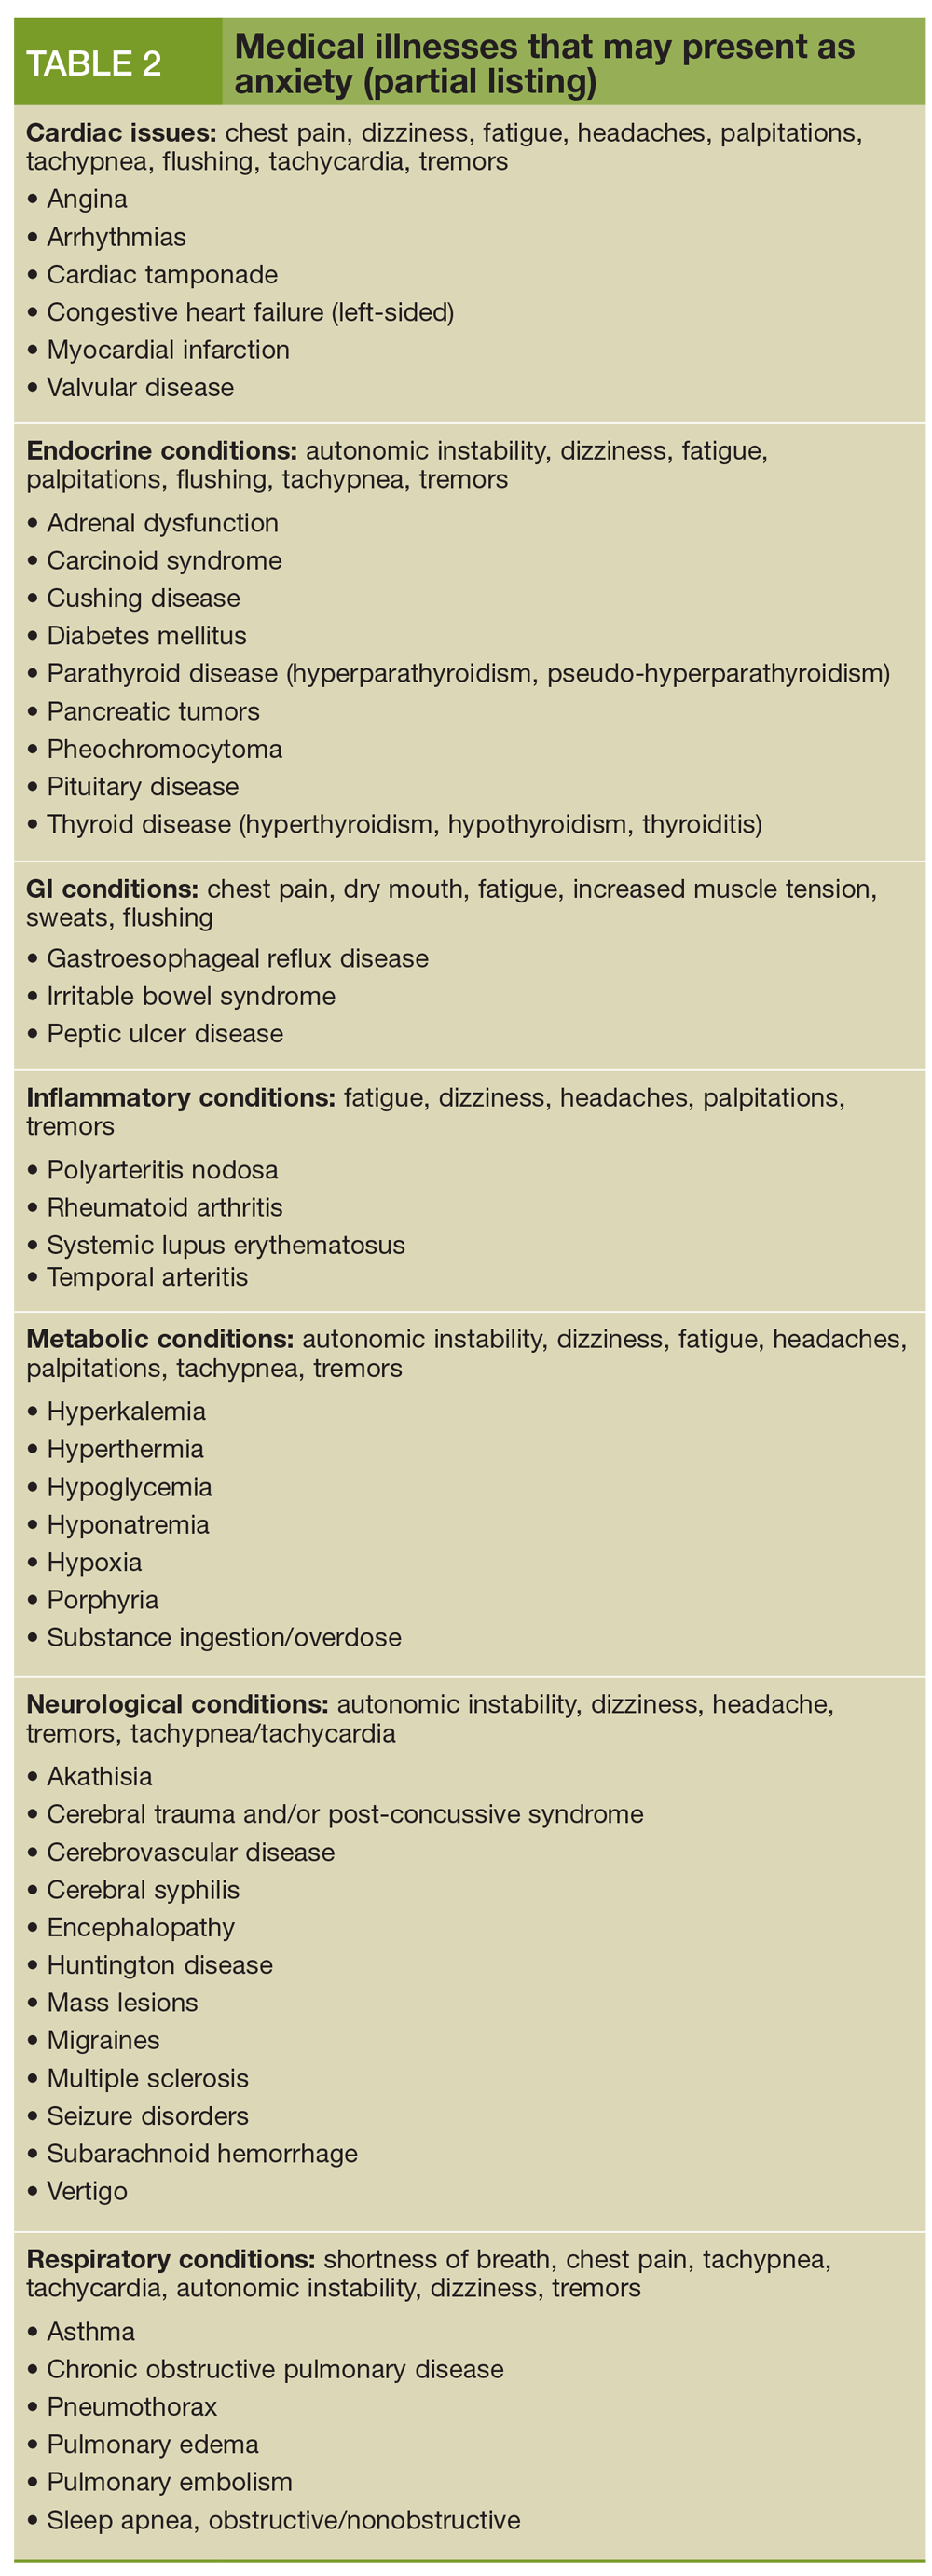 Medical illnesses that may present as anxiety (partial listing)